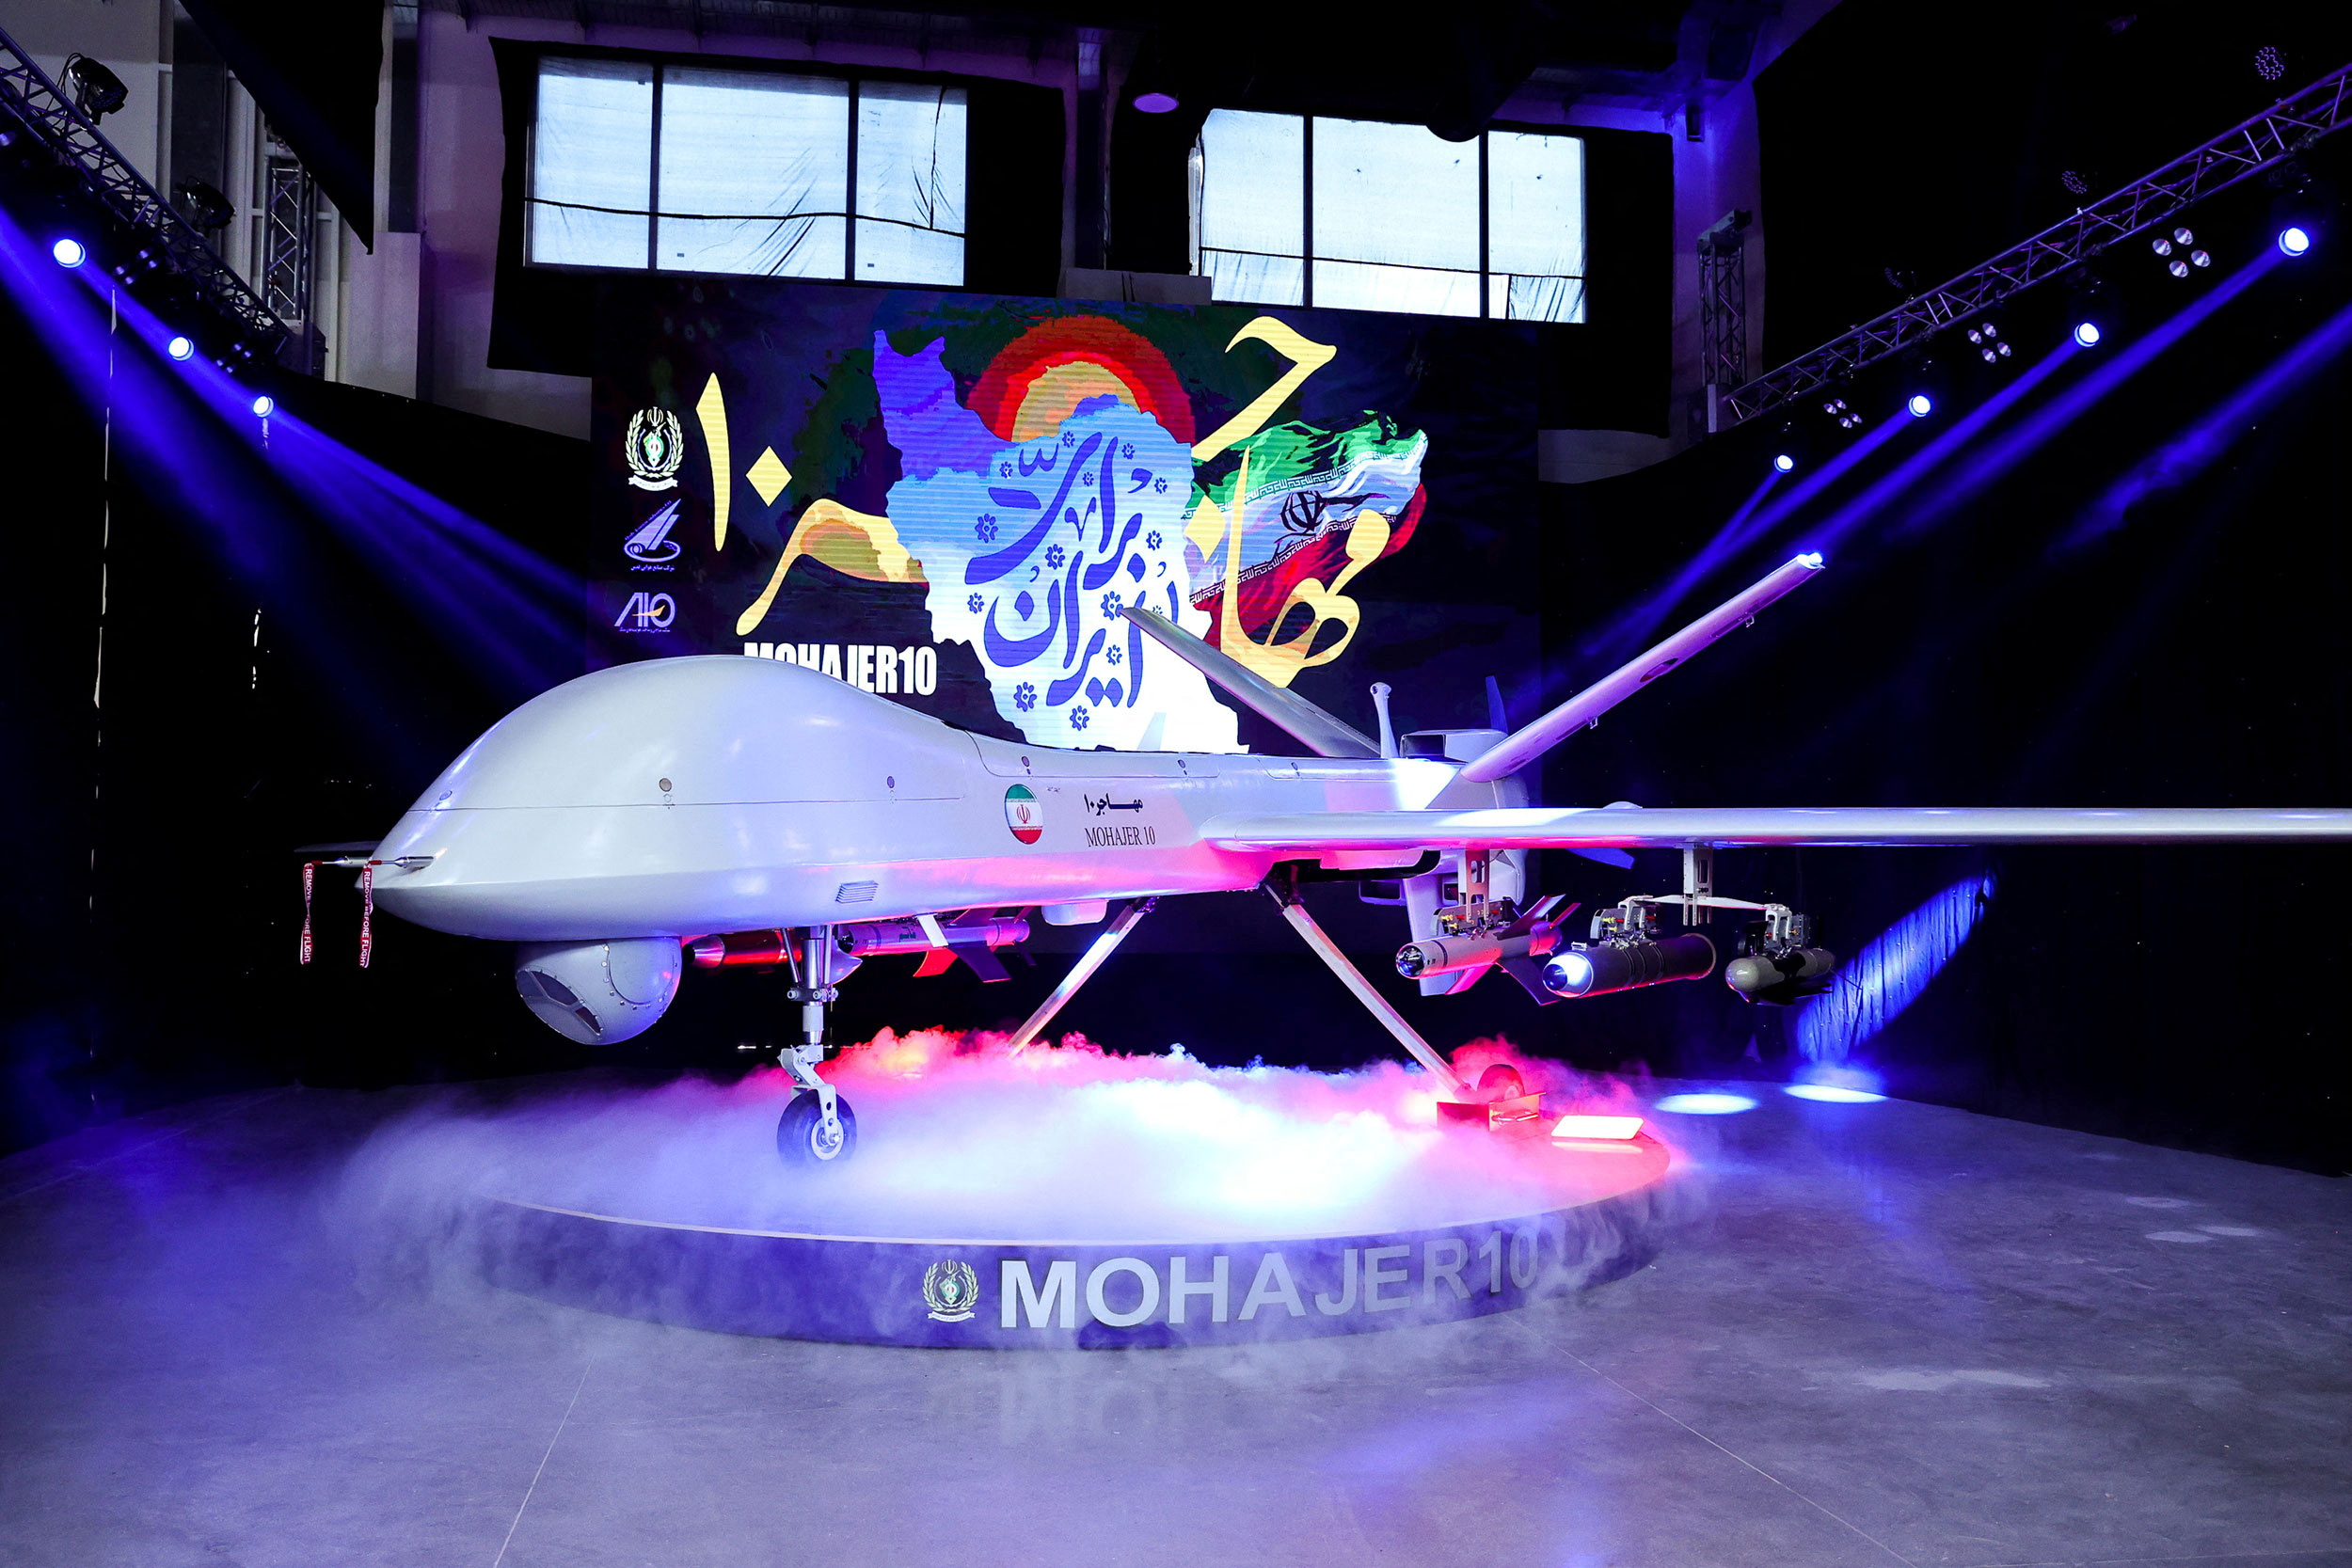 Video: Mohajer 10, the new Iranian drone that mimics the American Reaper